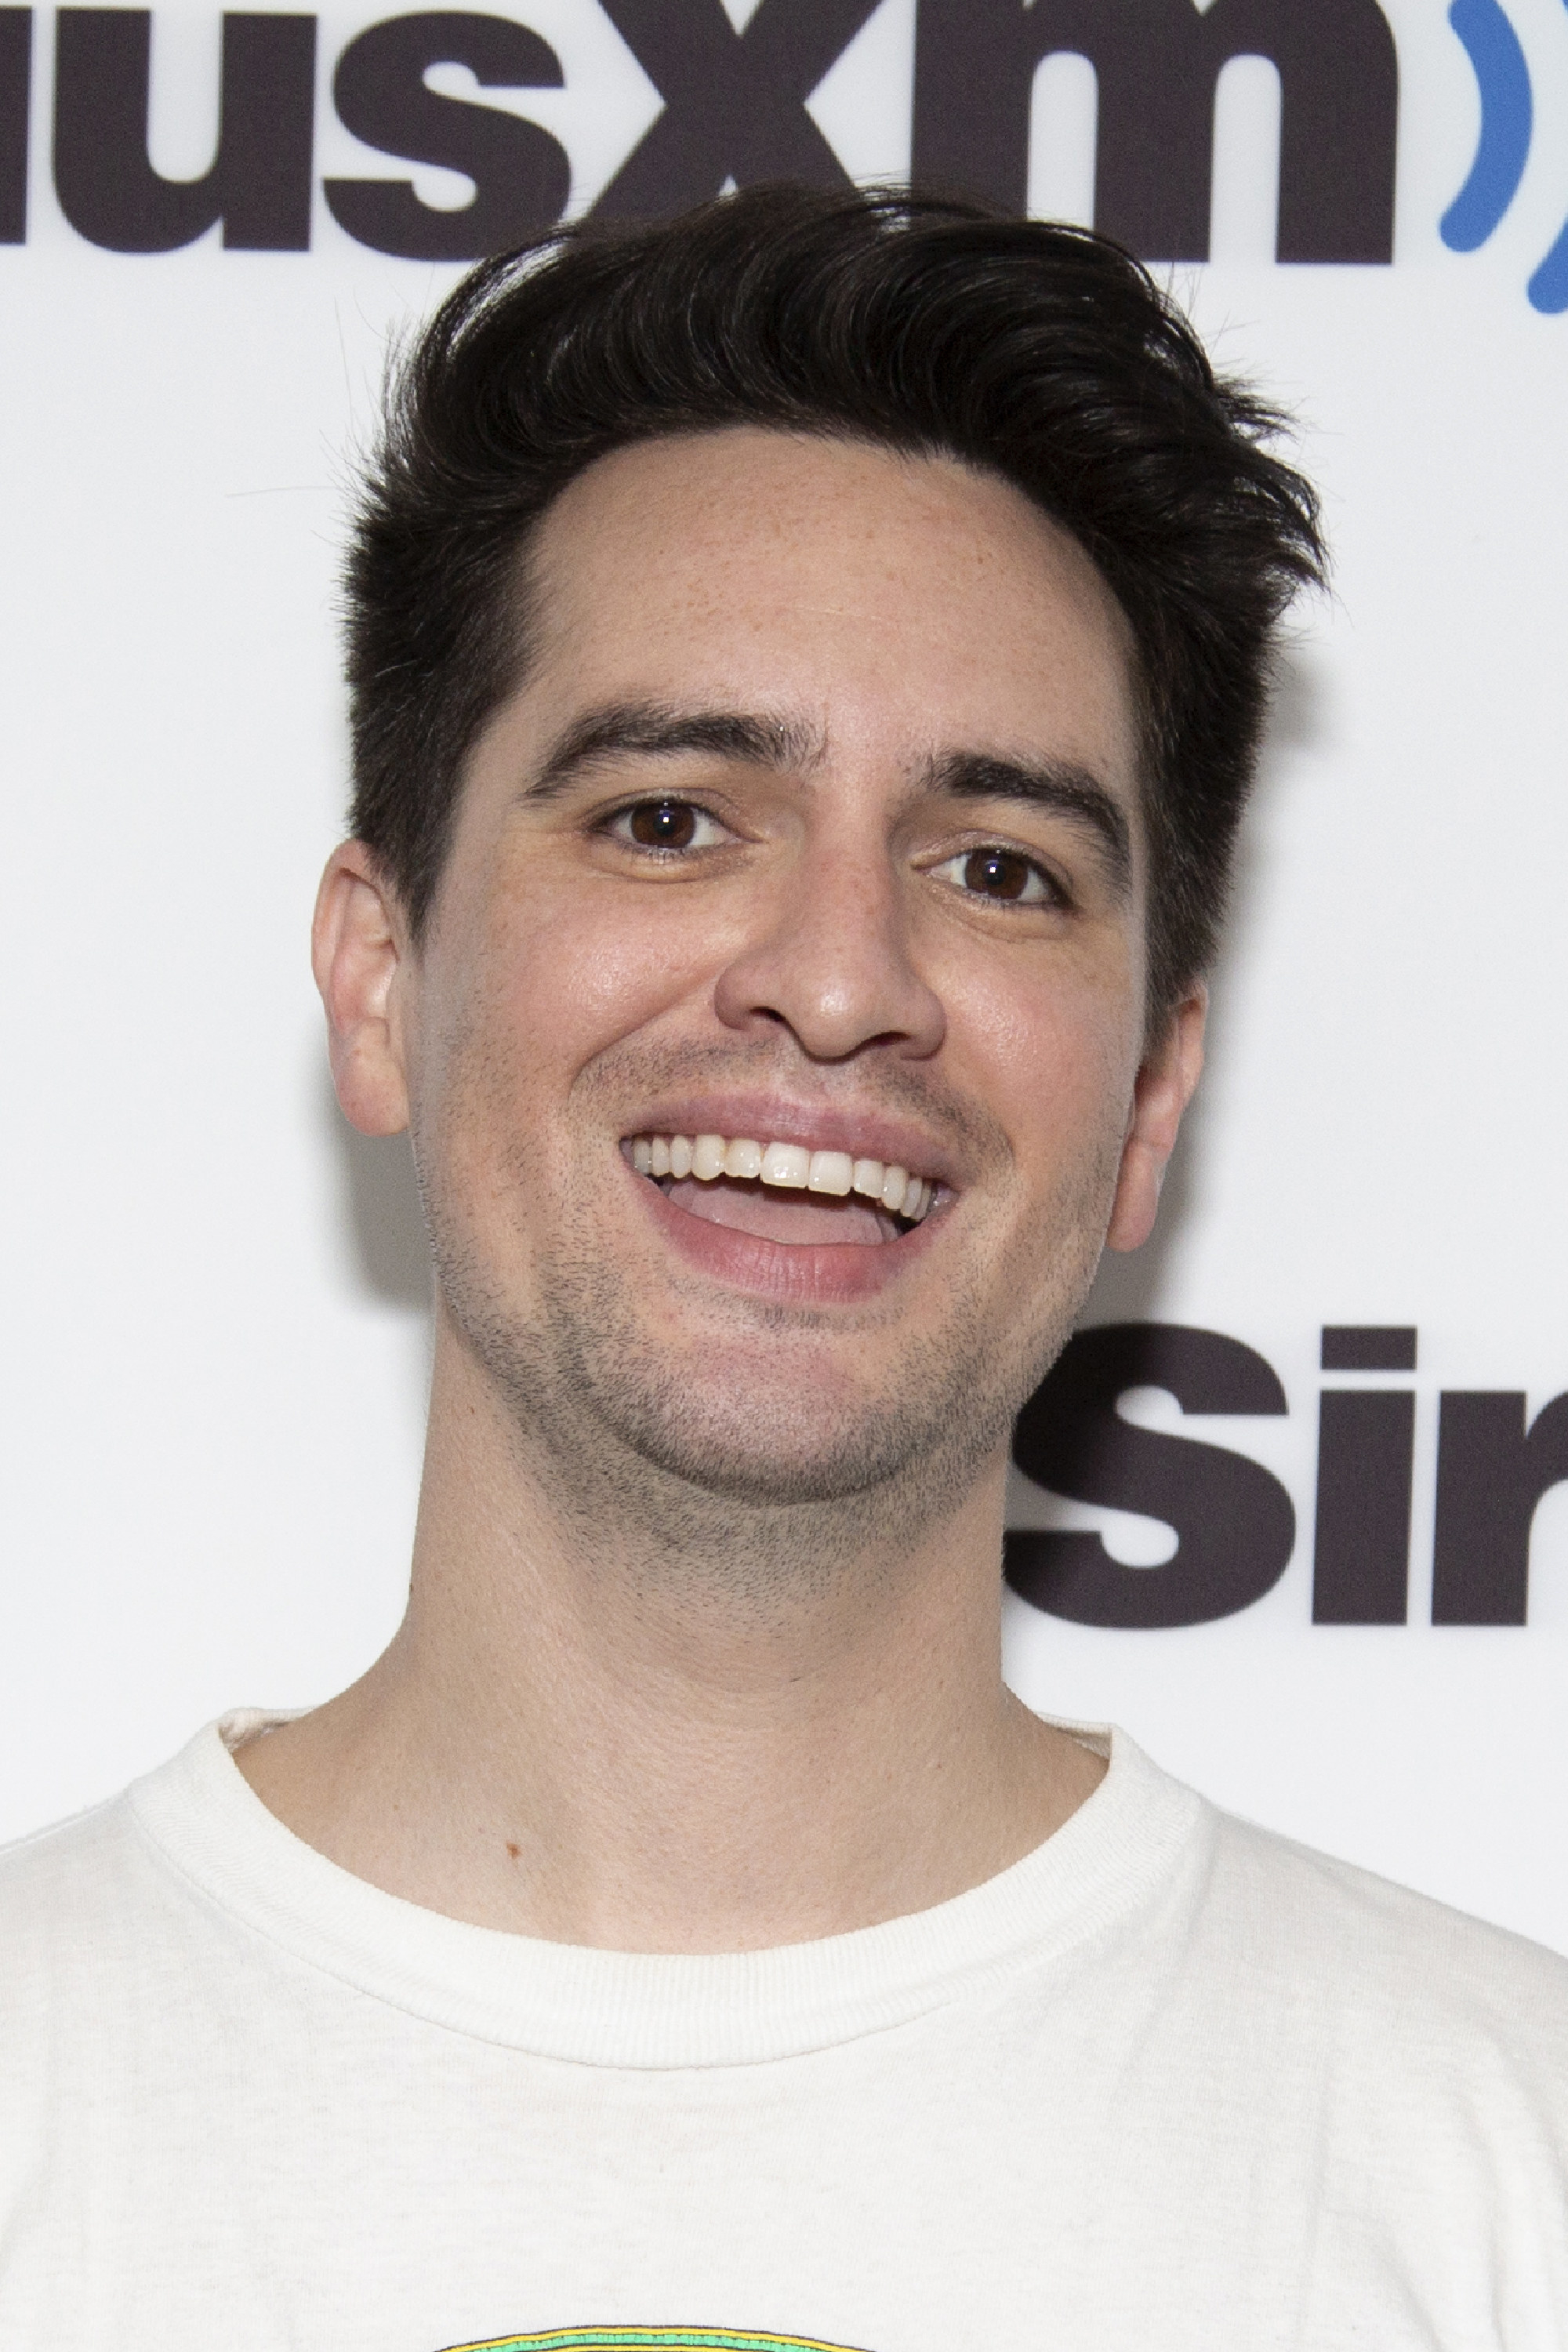 A closeup of Brendon smiling widely